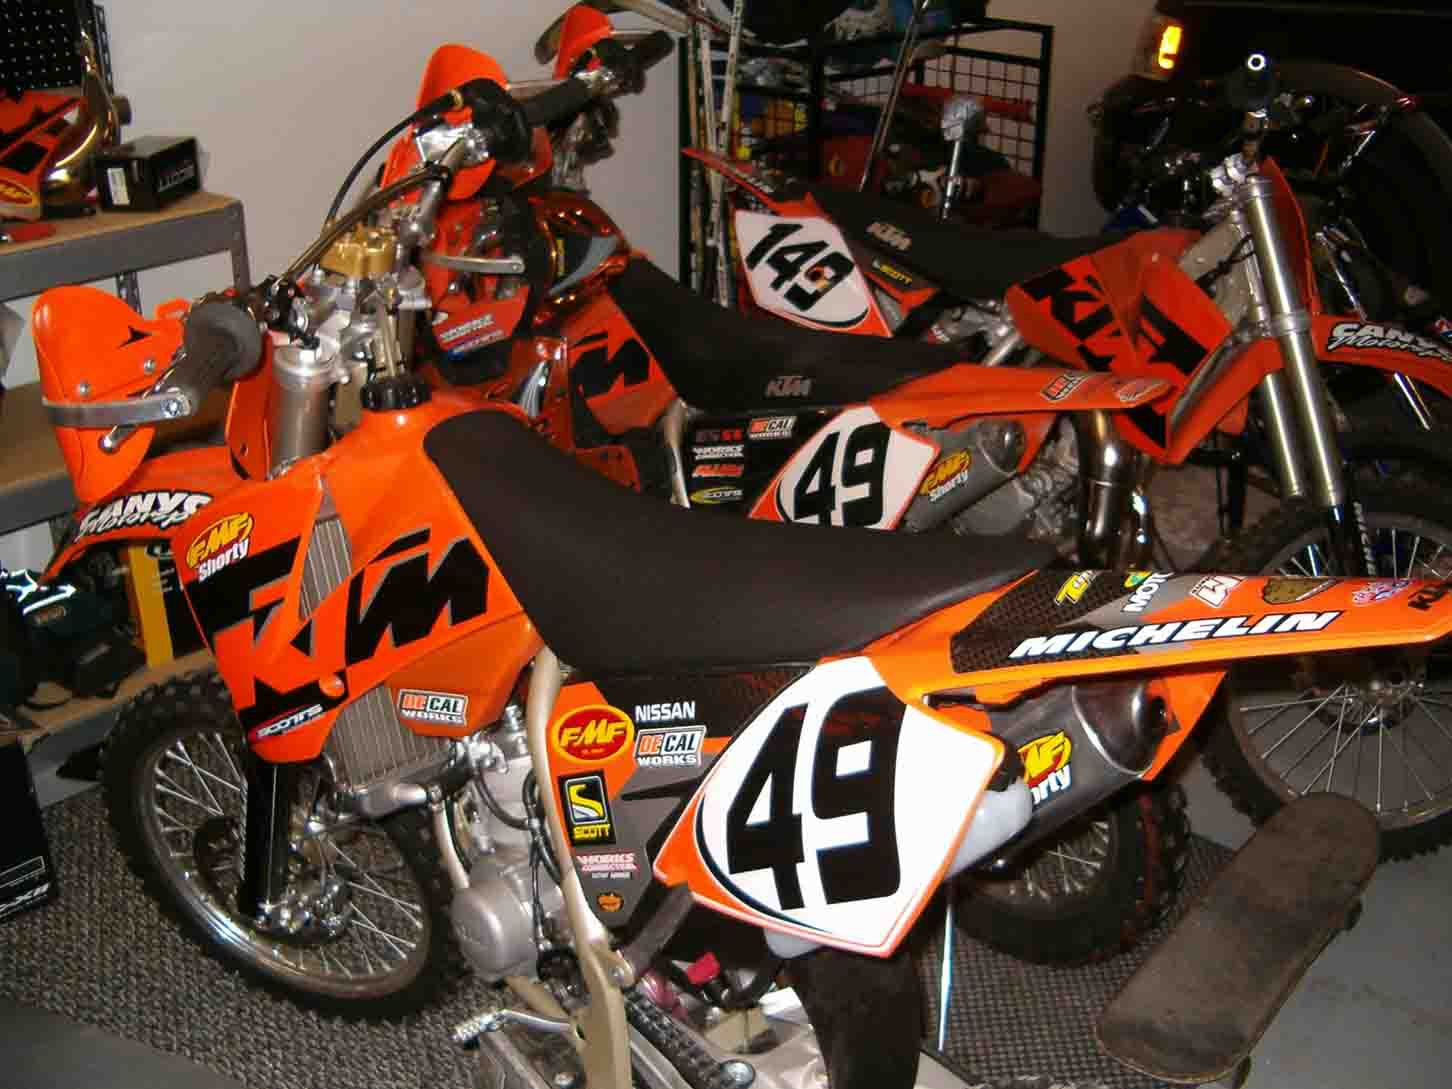 here are my bikes, my pitbike isnt in the shot tho cas i dont care about it haha